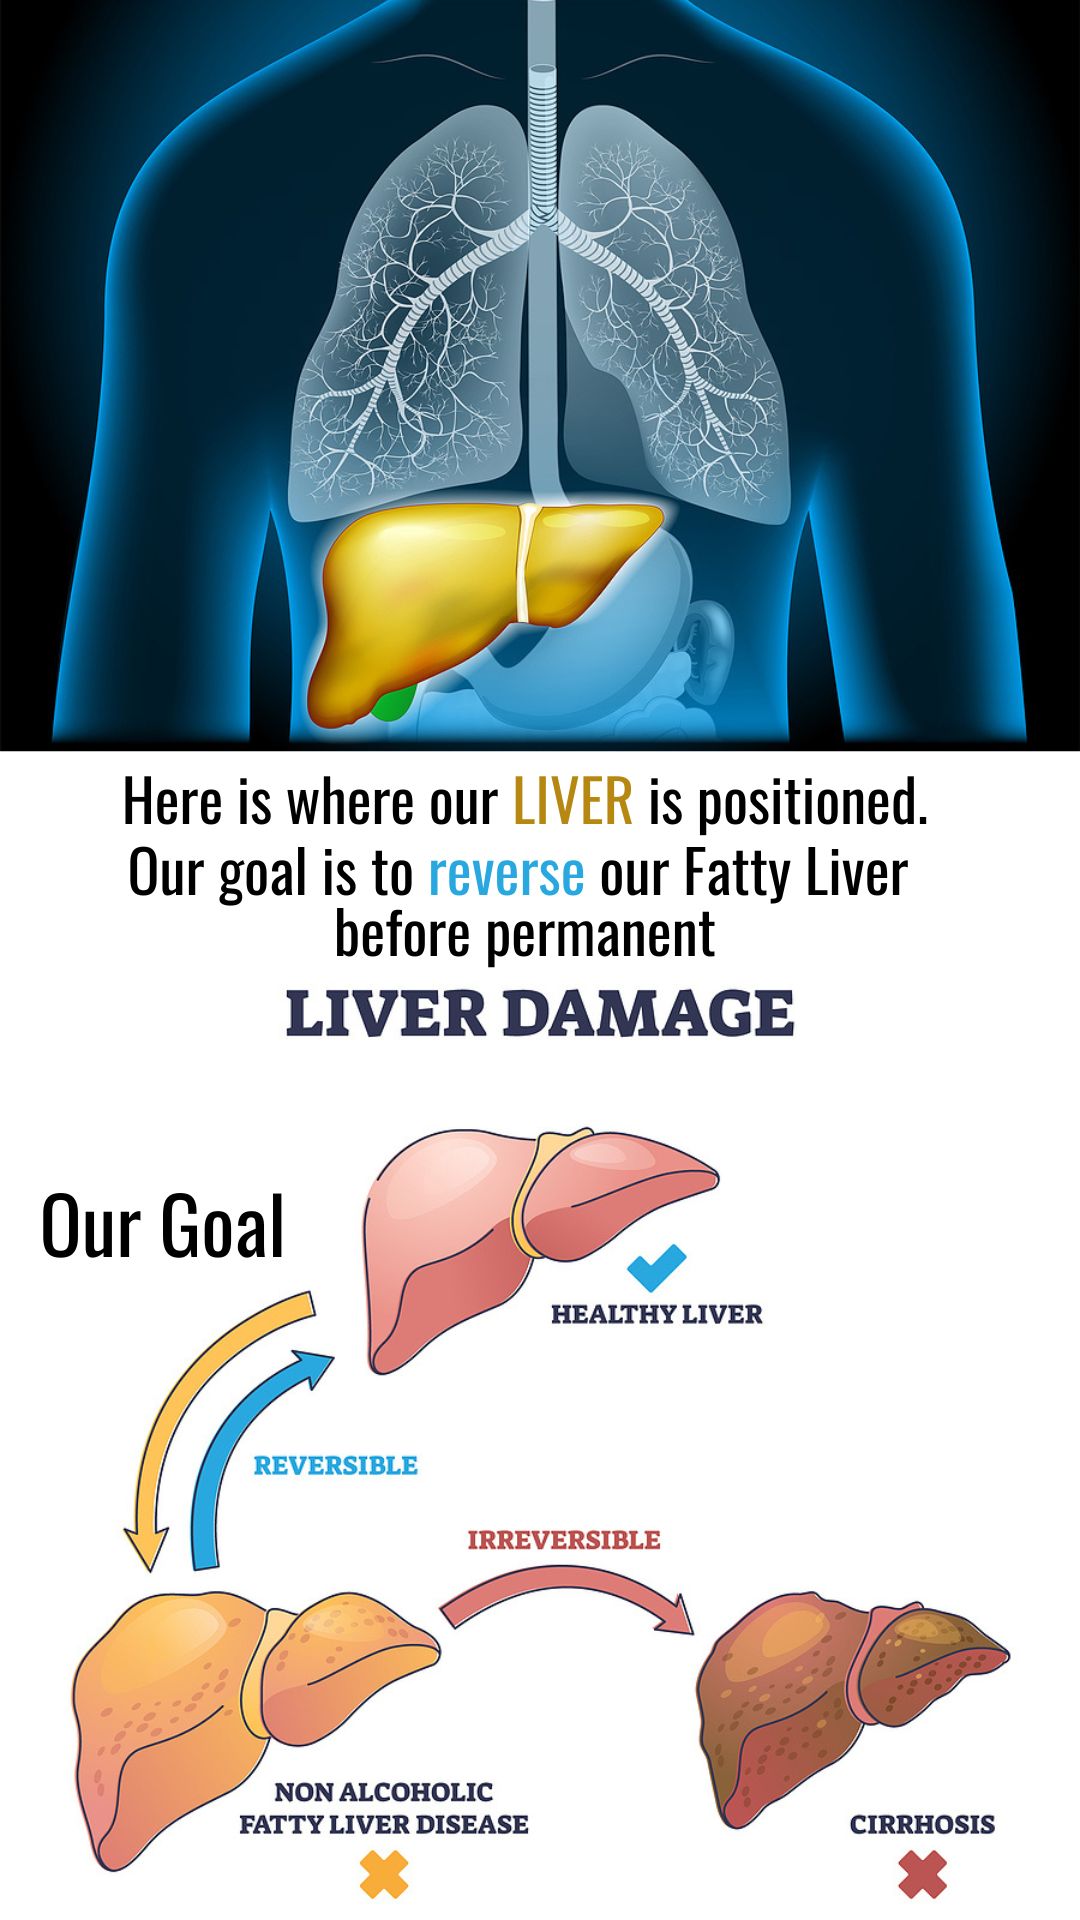 Illustration where the liver is located and flow chart of reversing fatty liver or it becoming permanently damaged